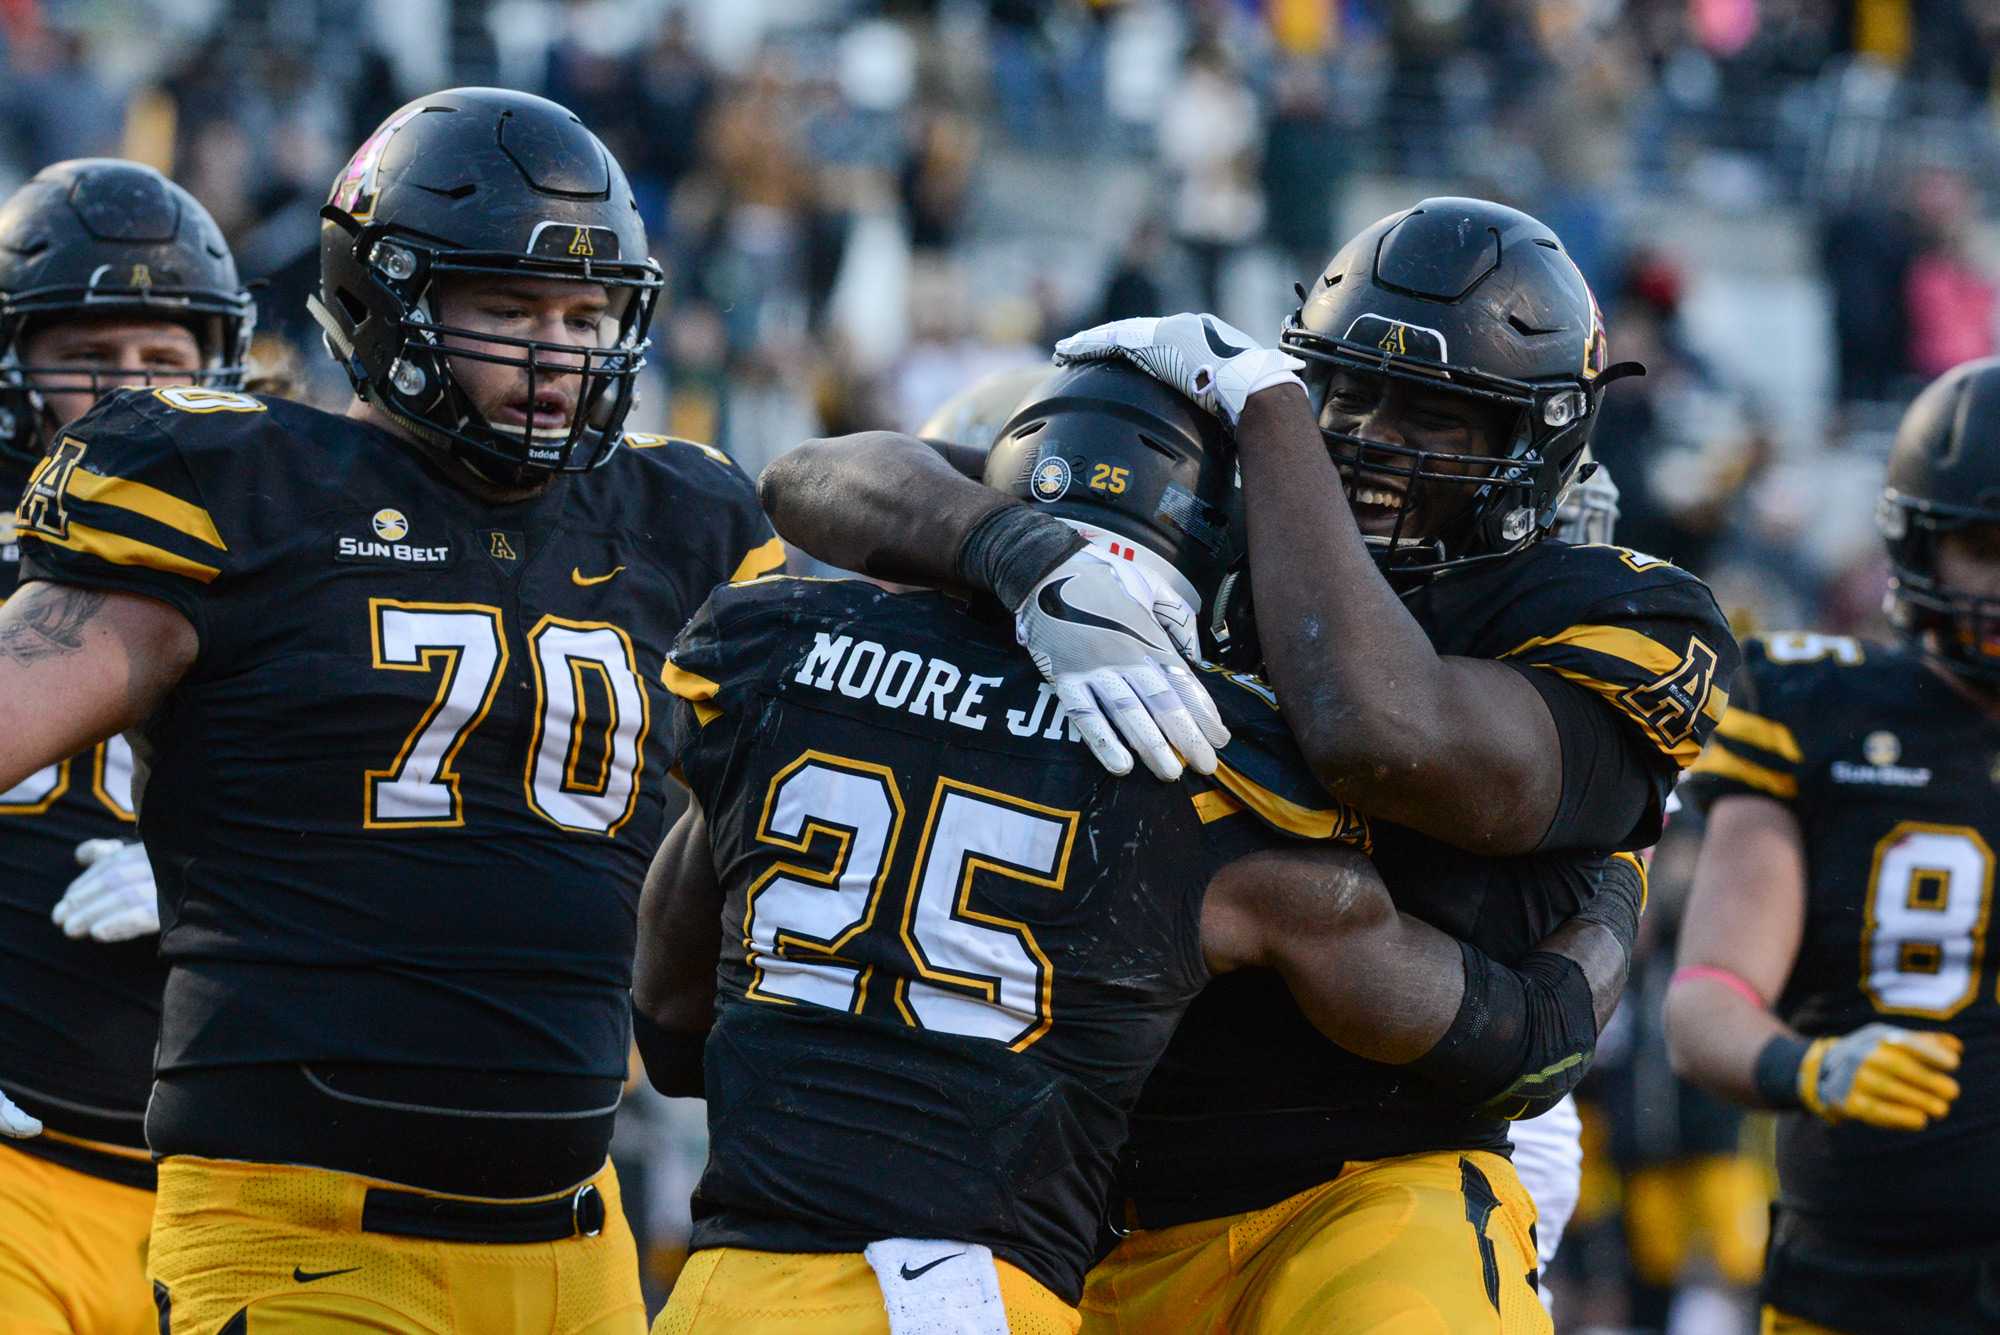 App State will face Toledo in the Camellia Bowl on December 17 

Photo By: Dallas Linger